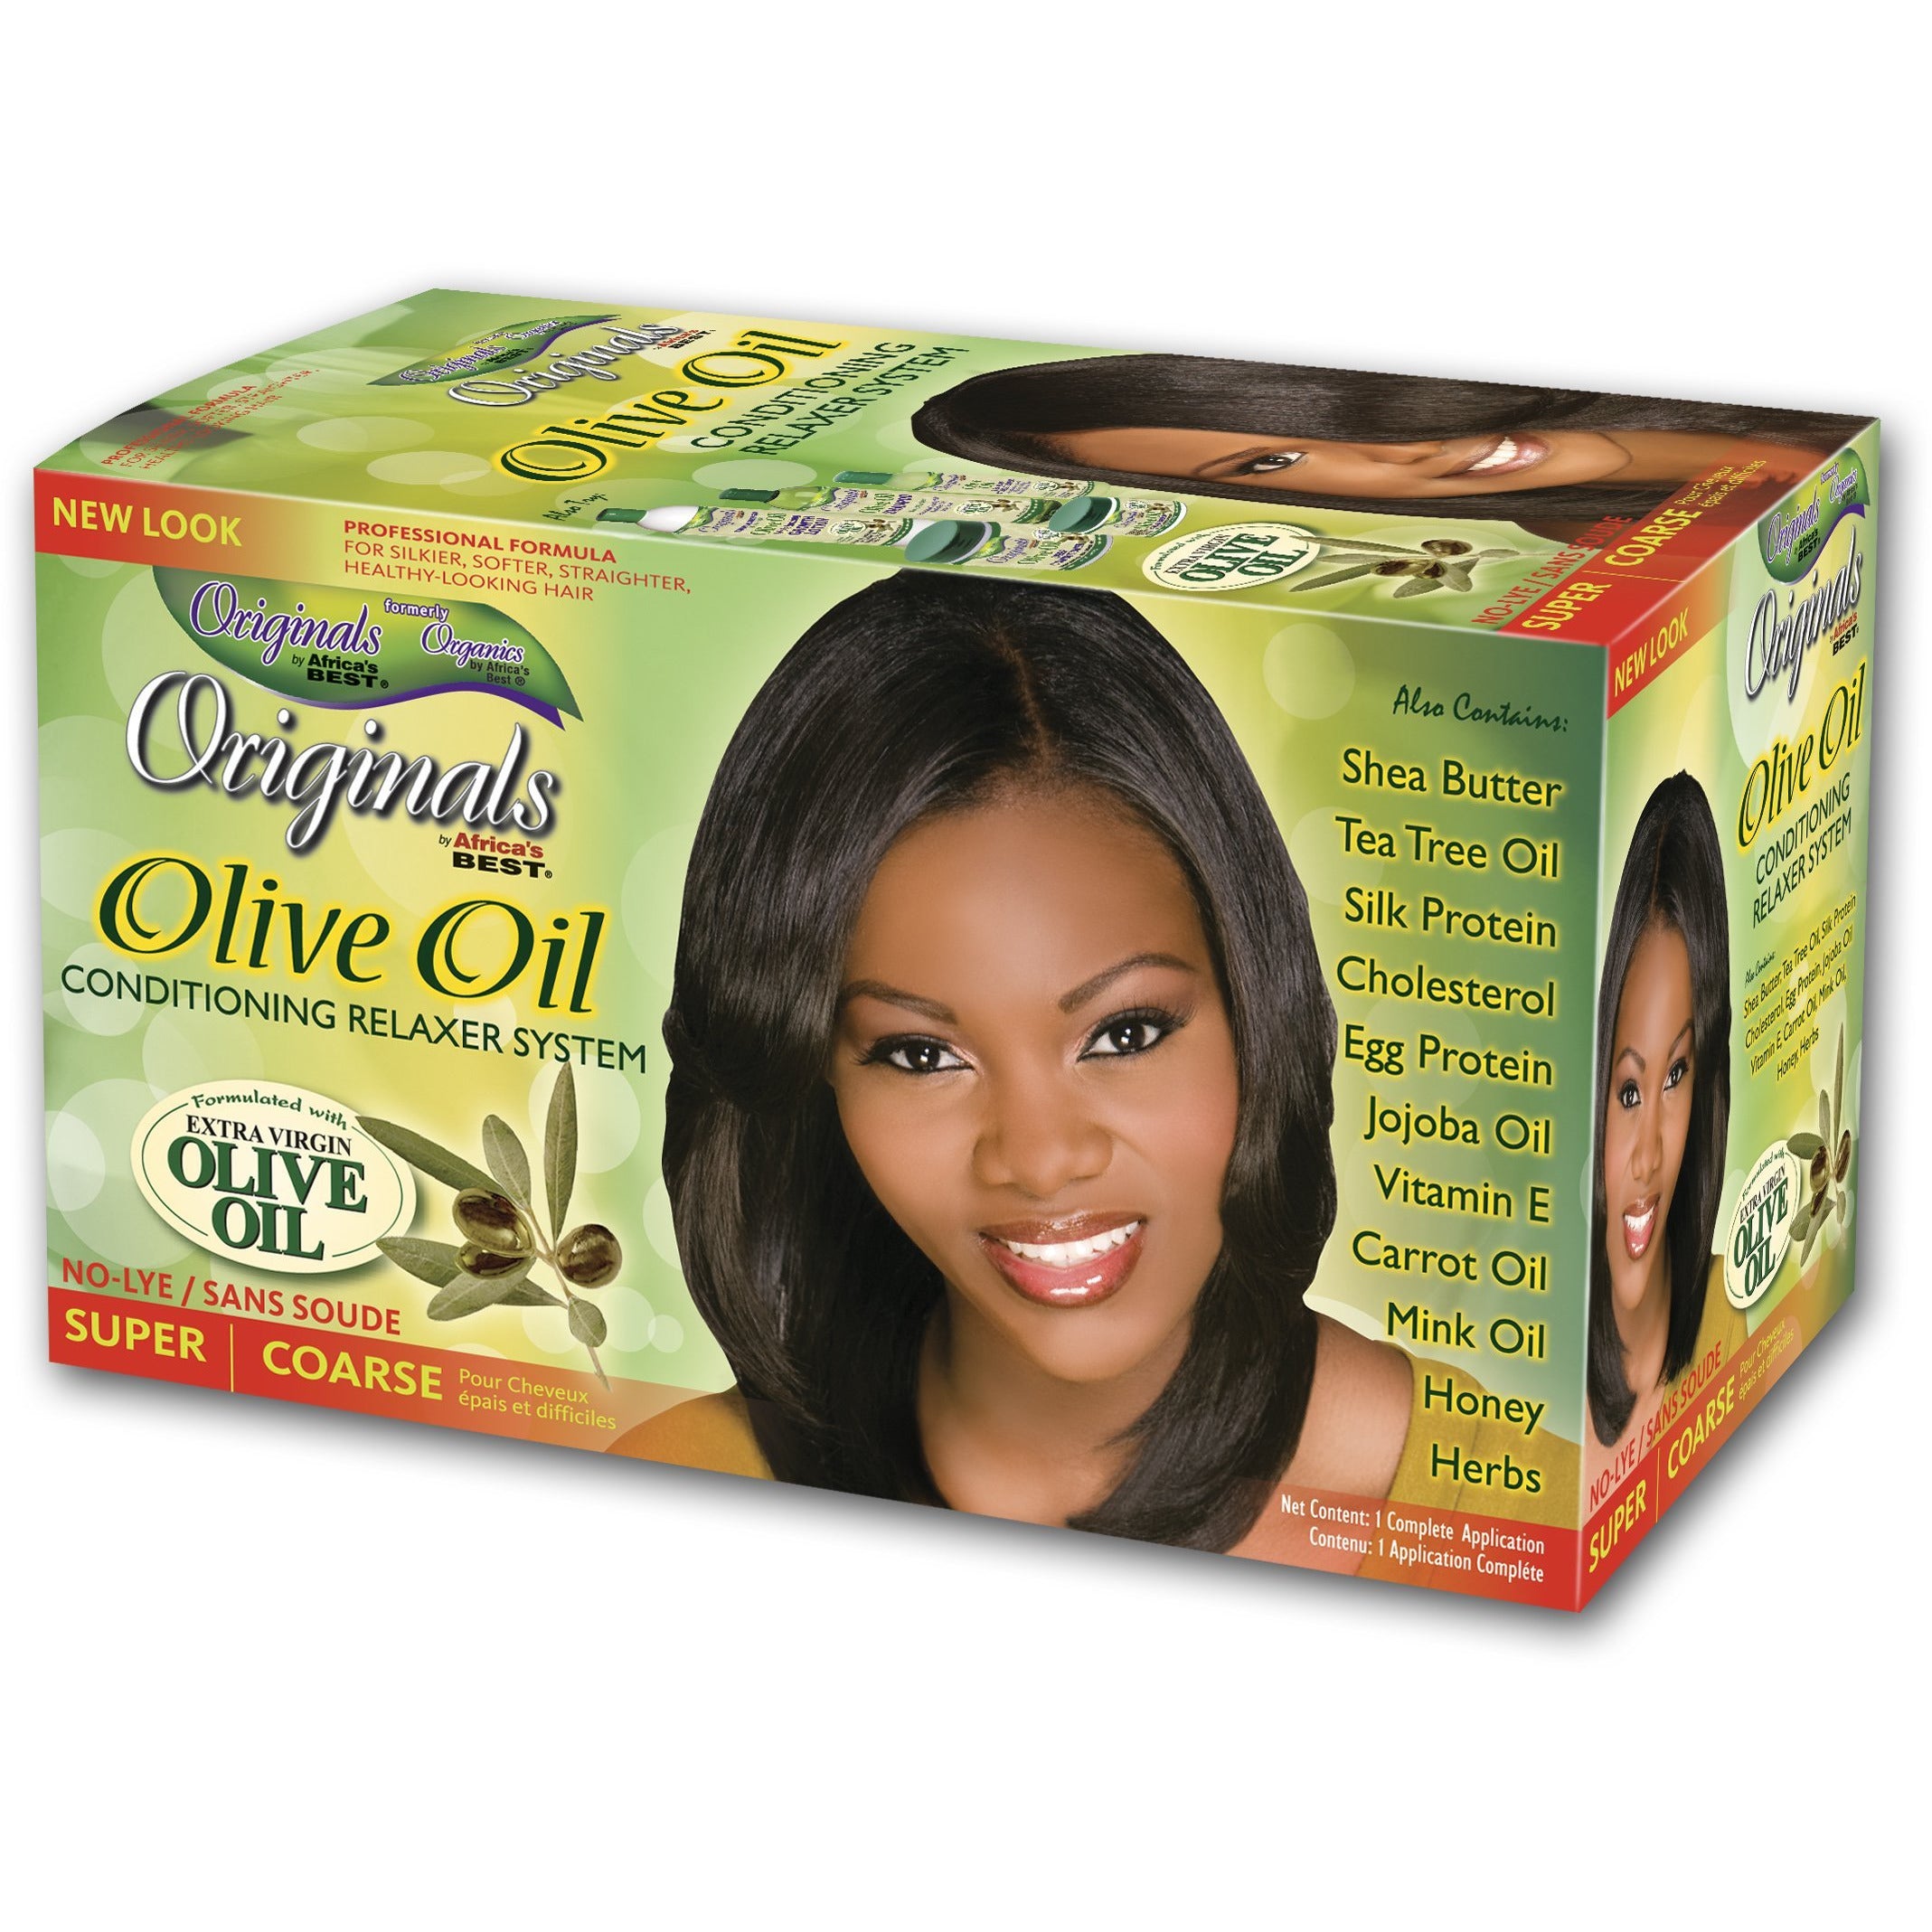 4th Ave Market: Africa's Best Originals Olive Oil Conditioning Relaxer System, Super/Coarse